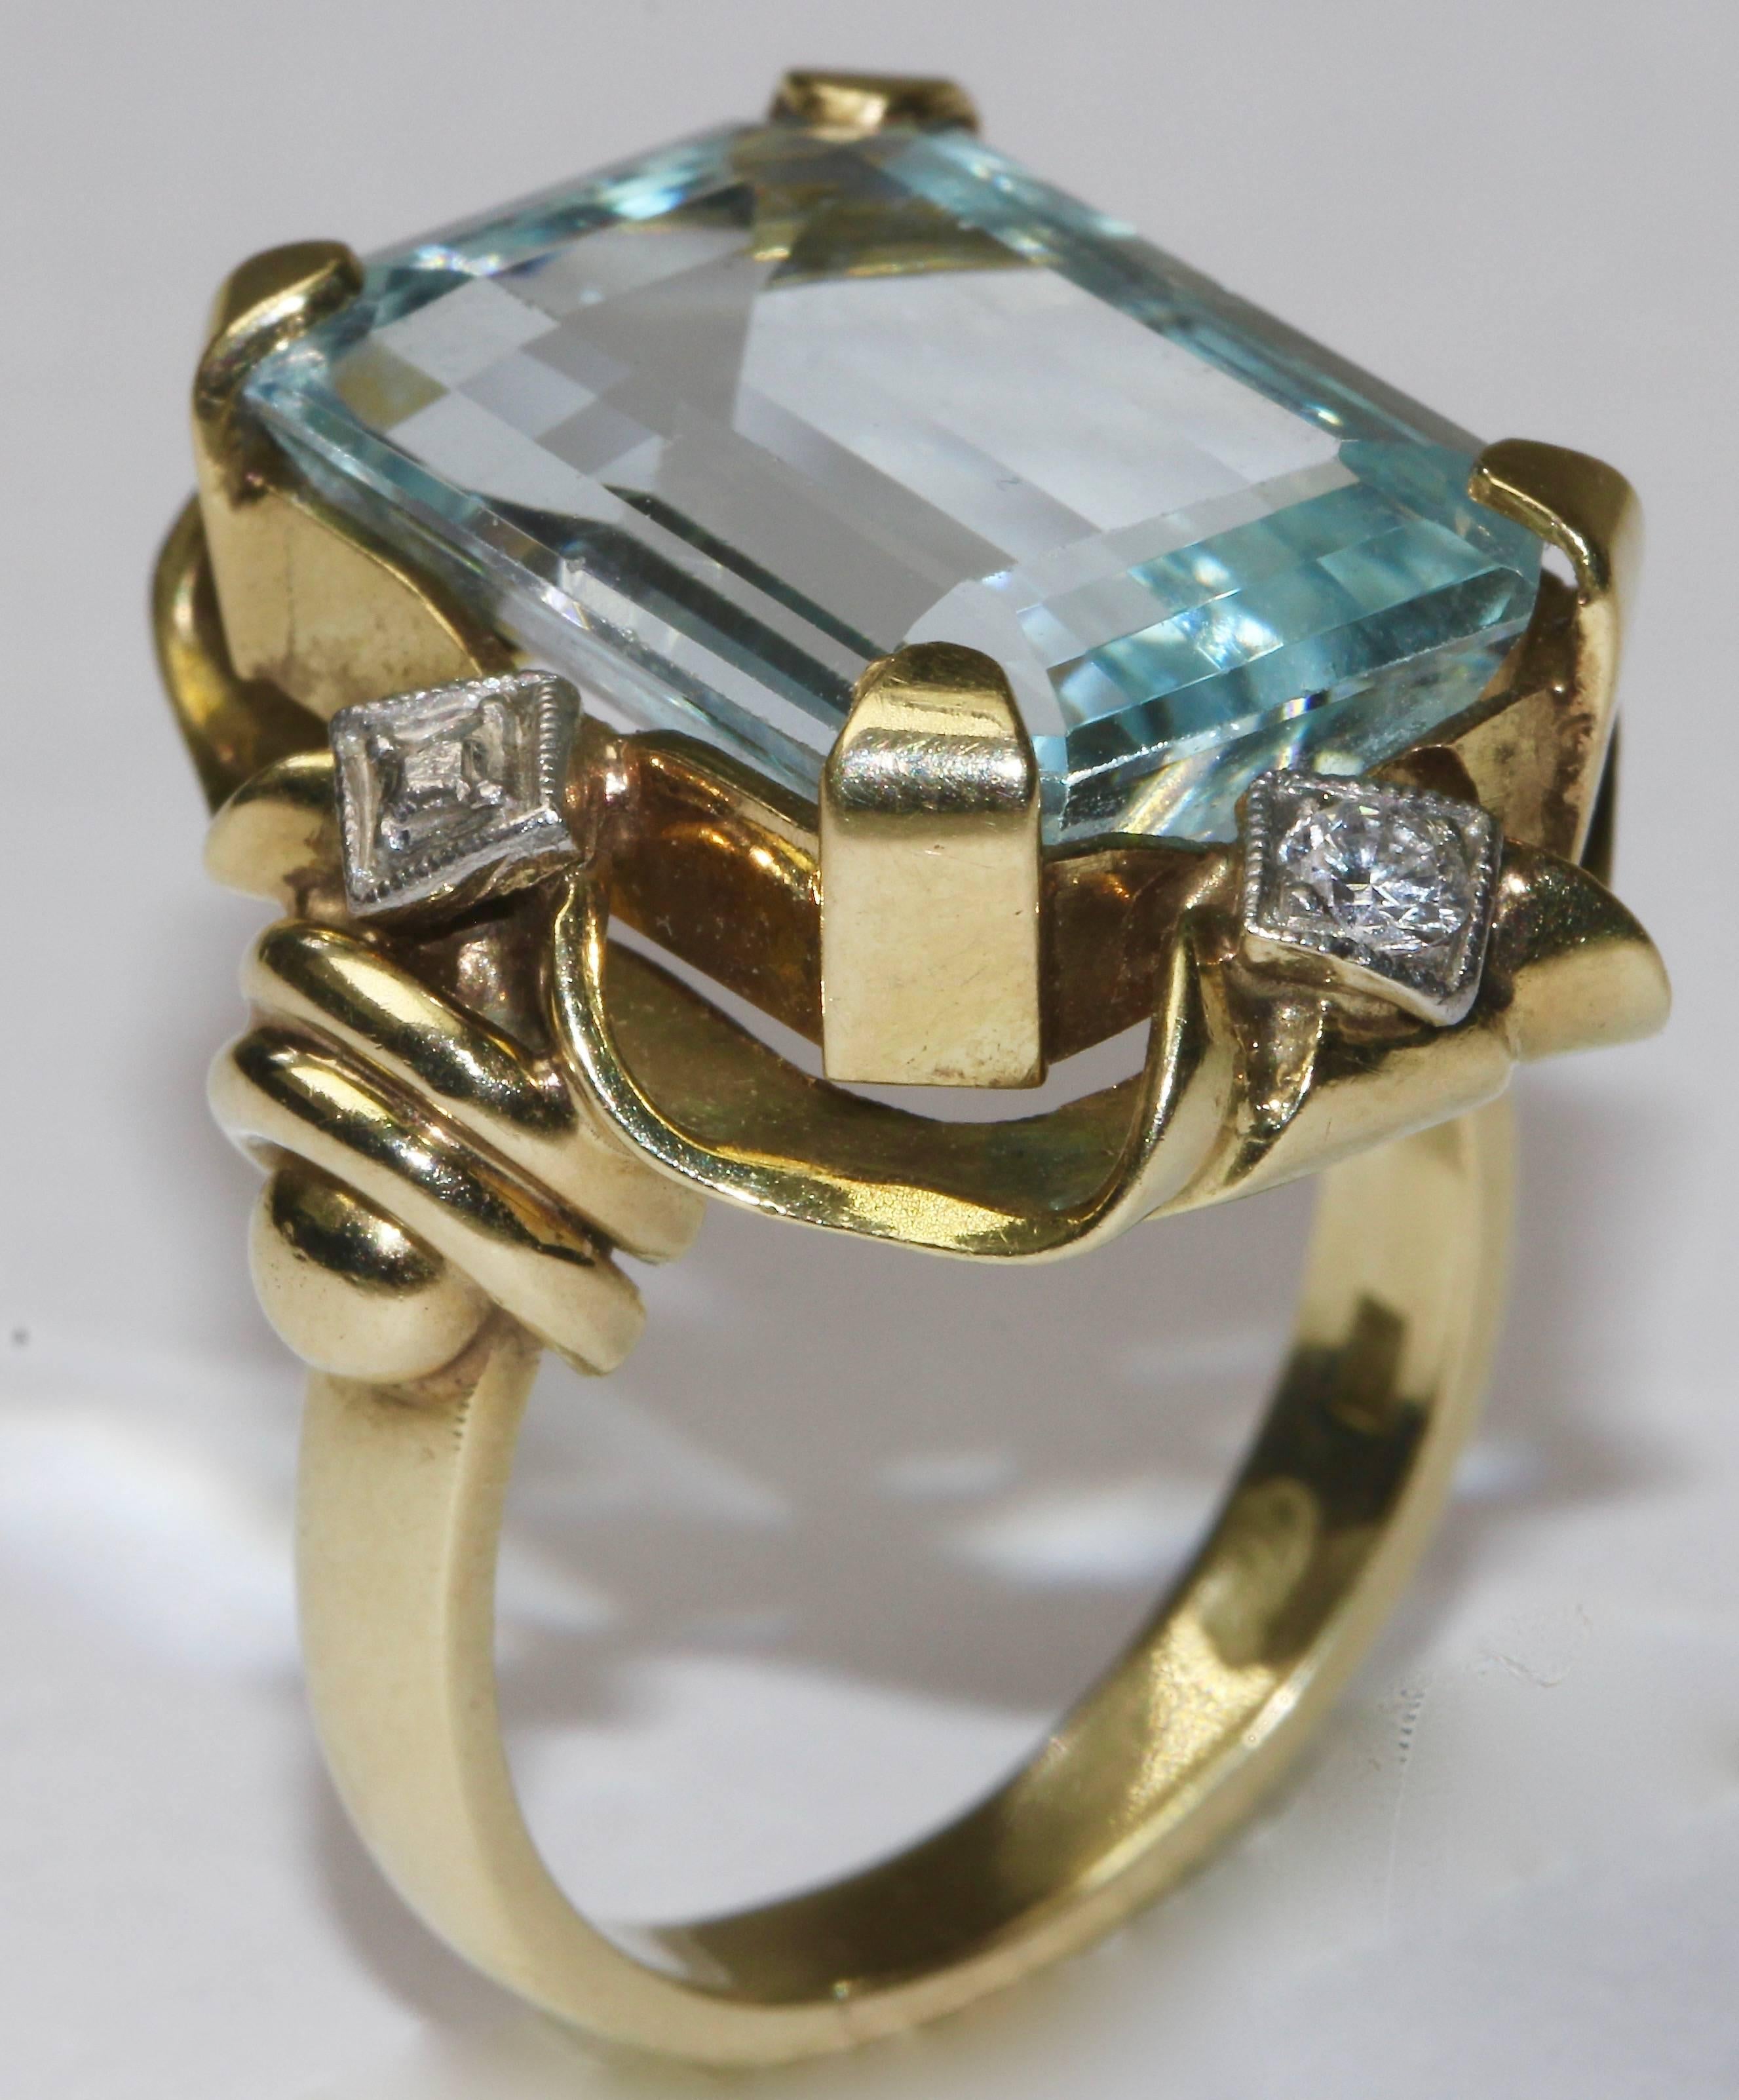 Elegant ladies gold ring with a large, faceted aquamarine.
Size of aquamarine is approx. 17mm x 12.8mm.
Set with two little diamonds.
Hallmarked.